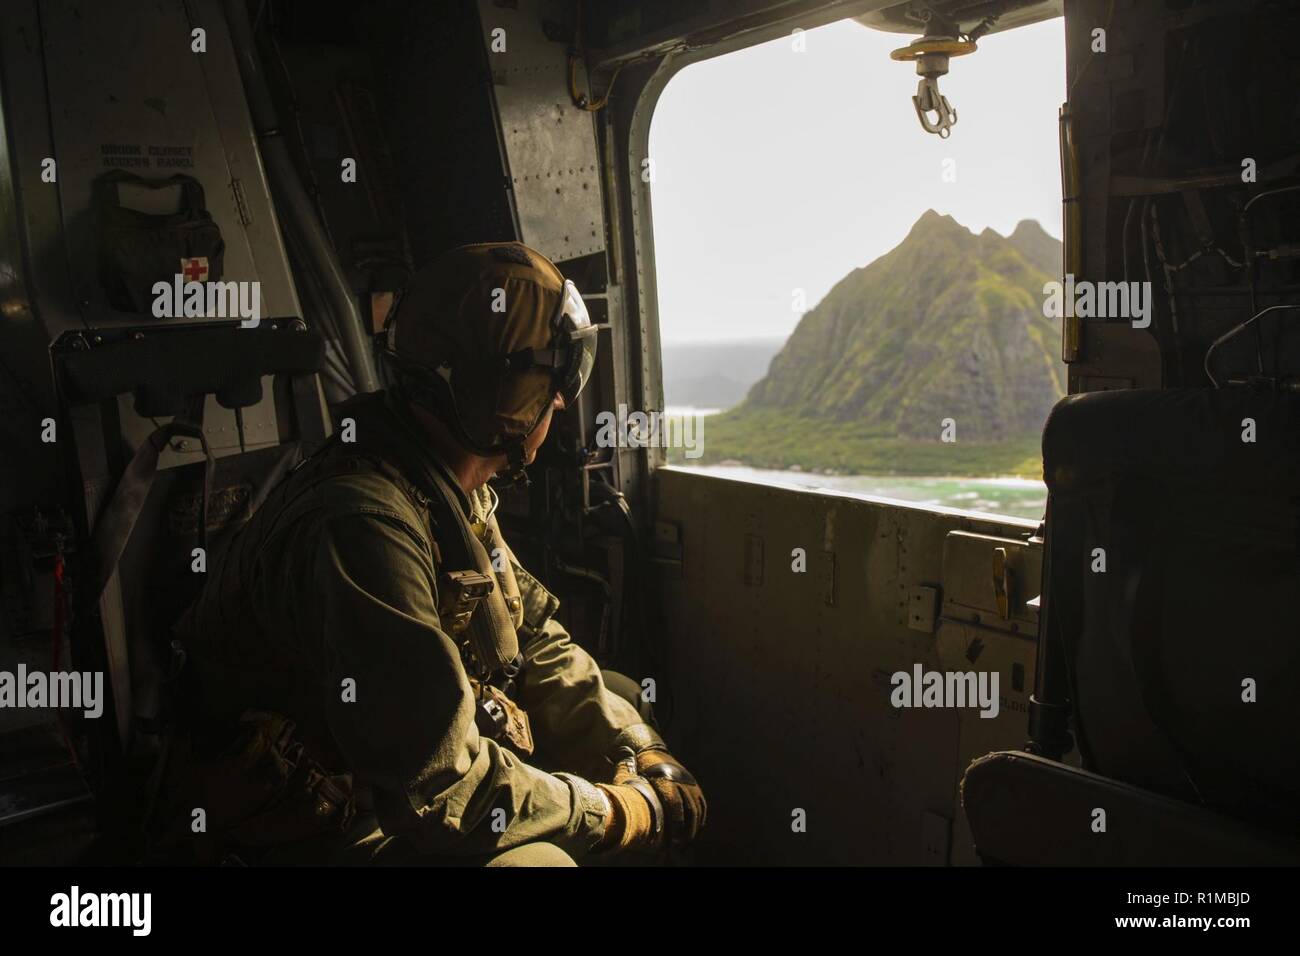 U.S. Marine Corps Gunnery Sgt. Todd Bauer, a crew chief with Marine Heavy Helicopter Squadron 463, Marine Aircraft Group 24, observes out the side door of a CH-53E Super Stallion during flight operations over the island of Oahu, Oct. 22, 2018. The flight was conducted to produce readiness within the squadron. Stock Photo